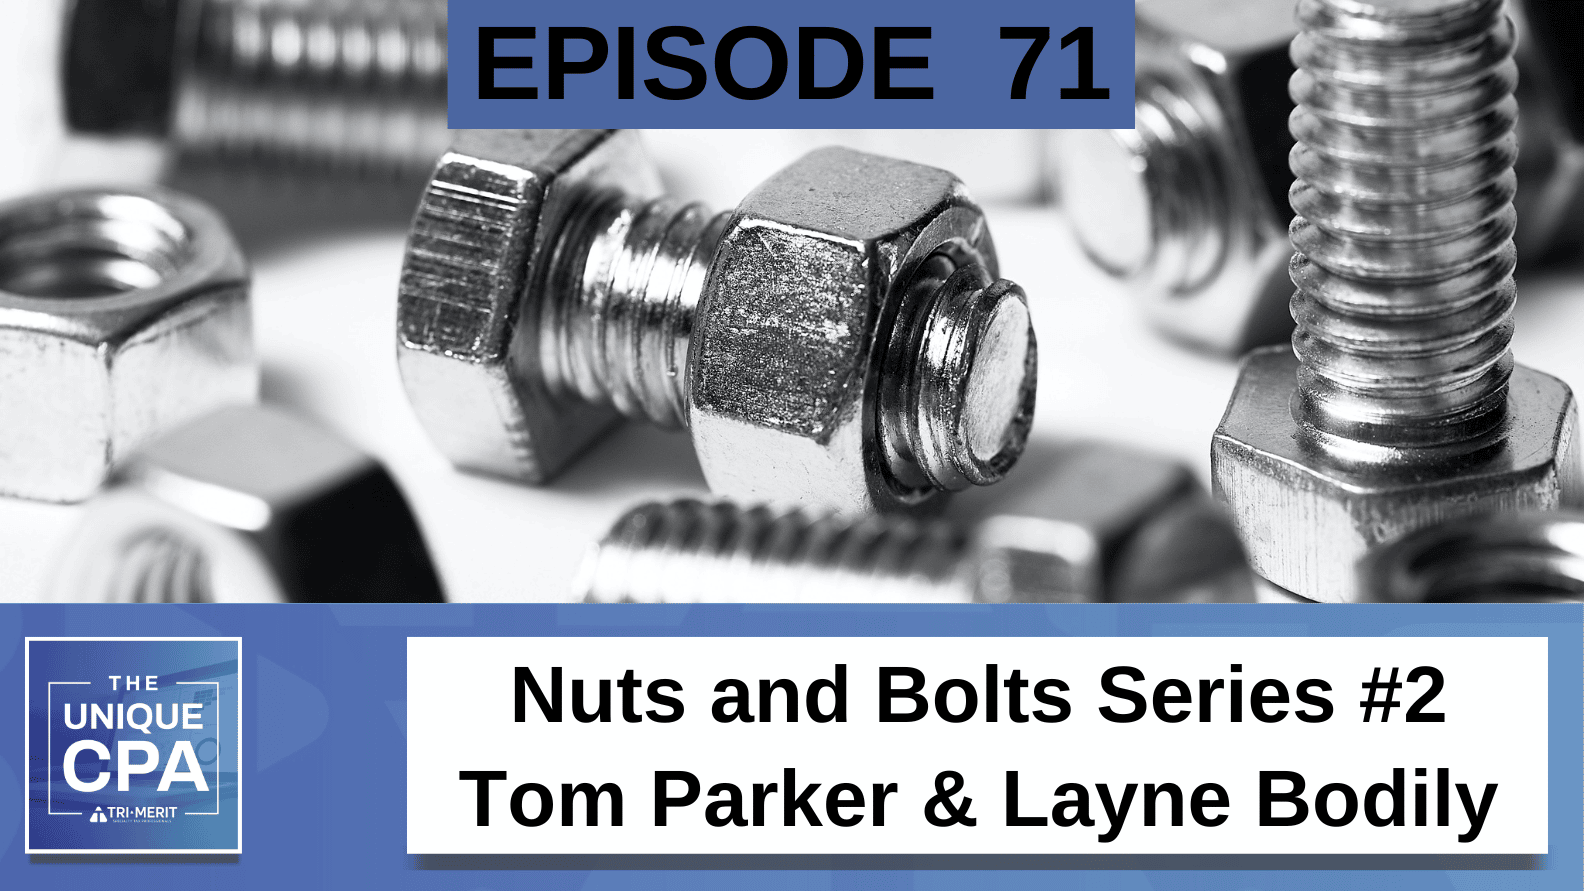 Unique Cpa Featured Image Ep 71 Tom Parker Layne Bodily - Nuts And Bolts Series #2 - Tri-Merit